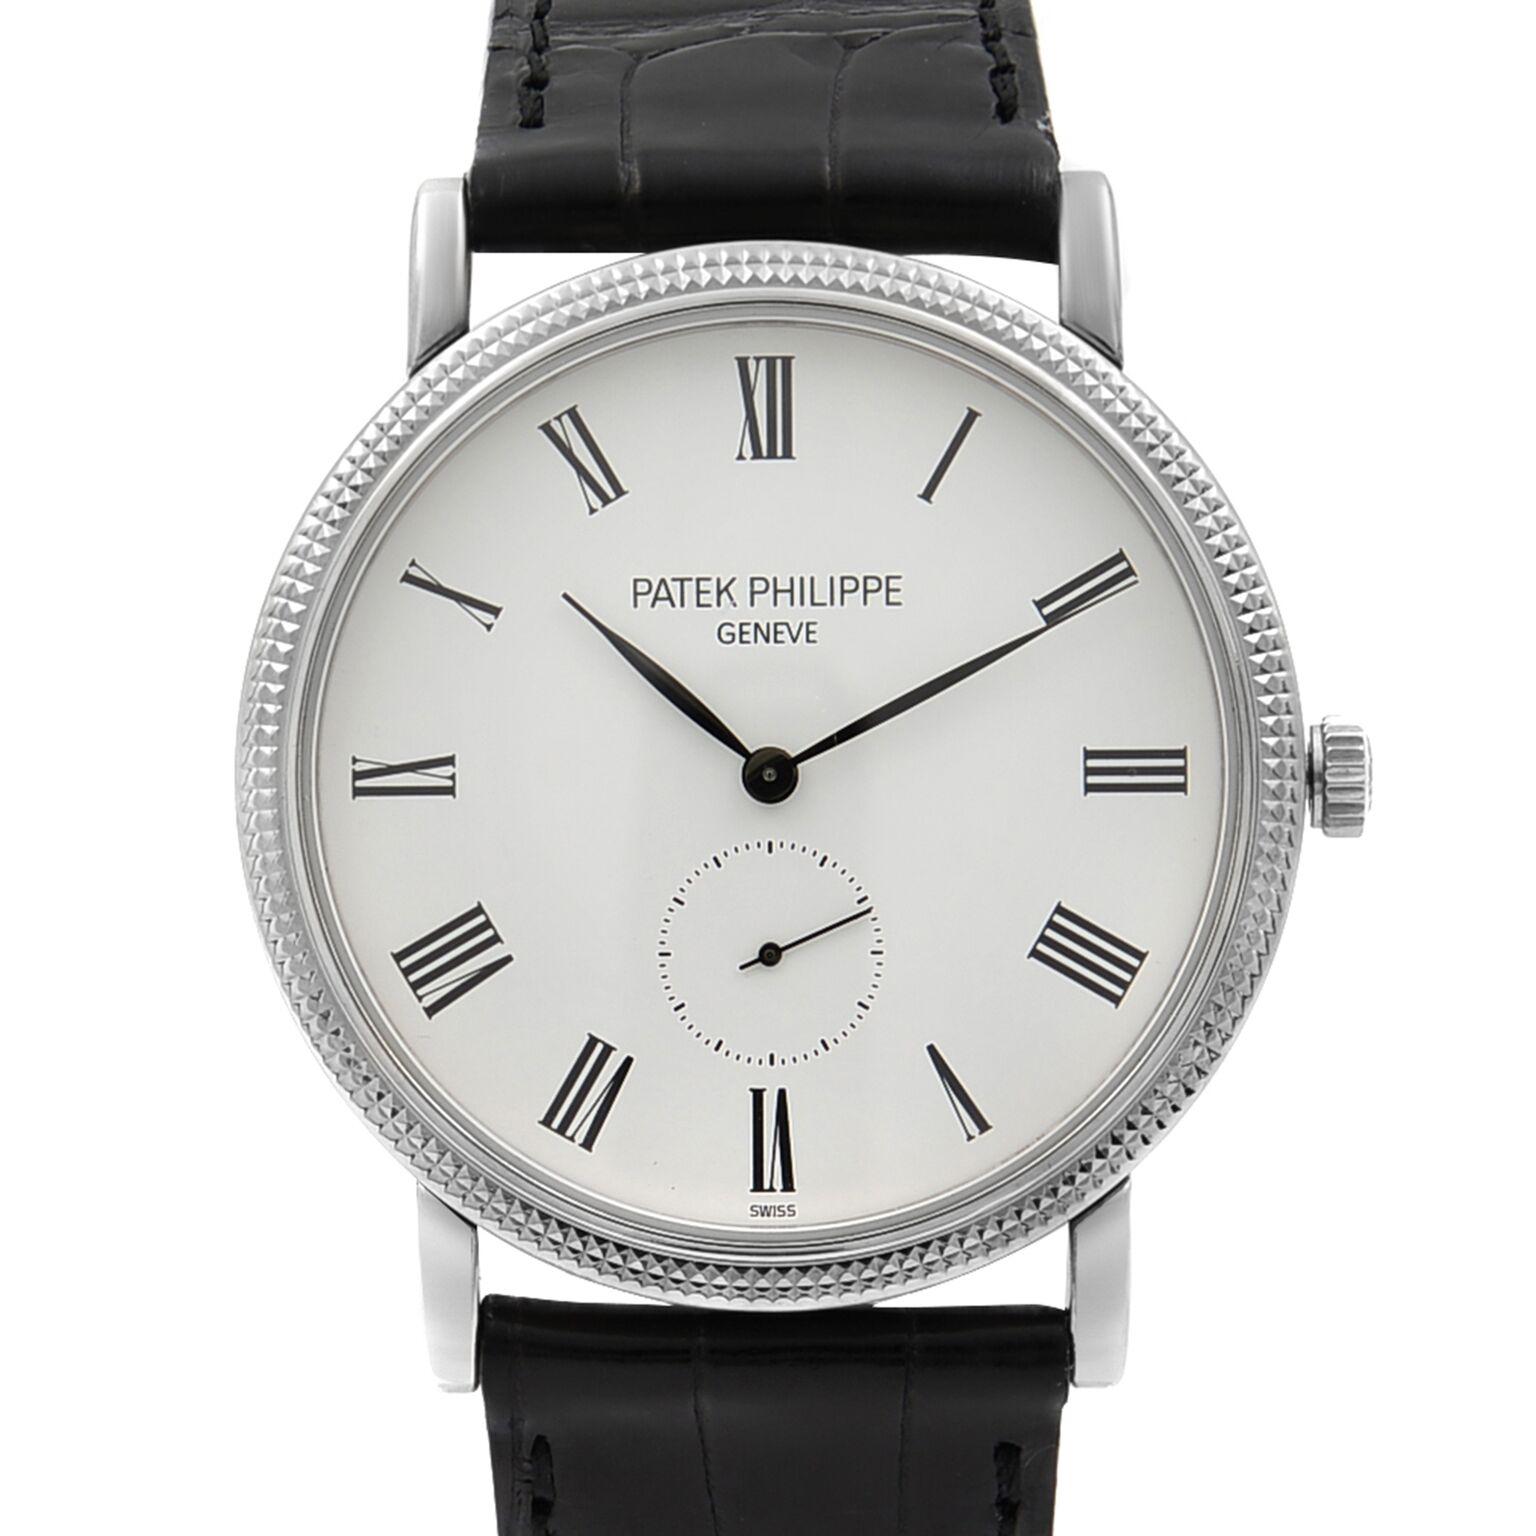 
This pre-owned Patek Philippe Calatrava 5119G-001 is a beautiful men's timepiece that is powered by mechanical (hand-winding) movement which is cased in a white gold case. It has a round shape face,  dial and has hand roman numerals style markers.